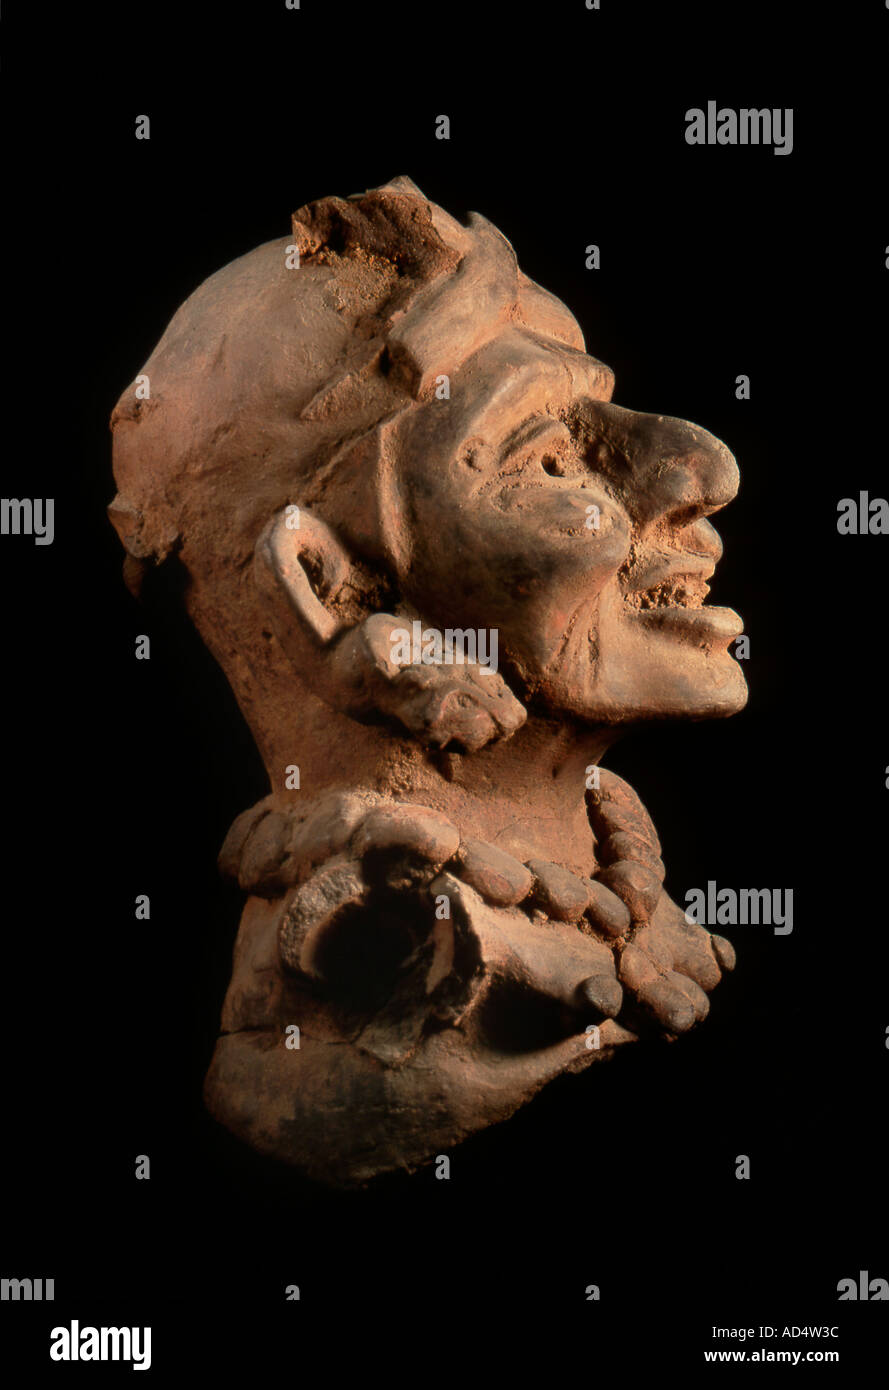 Mexico Artifact depicting an Old Woman from the Late Xoo phase 600 800 AD Oaxaca Monte Alban culture Zapotec Stock Photo